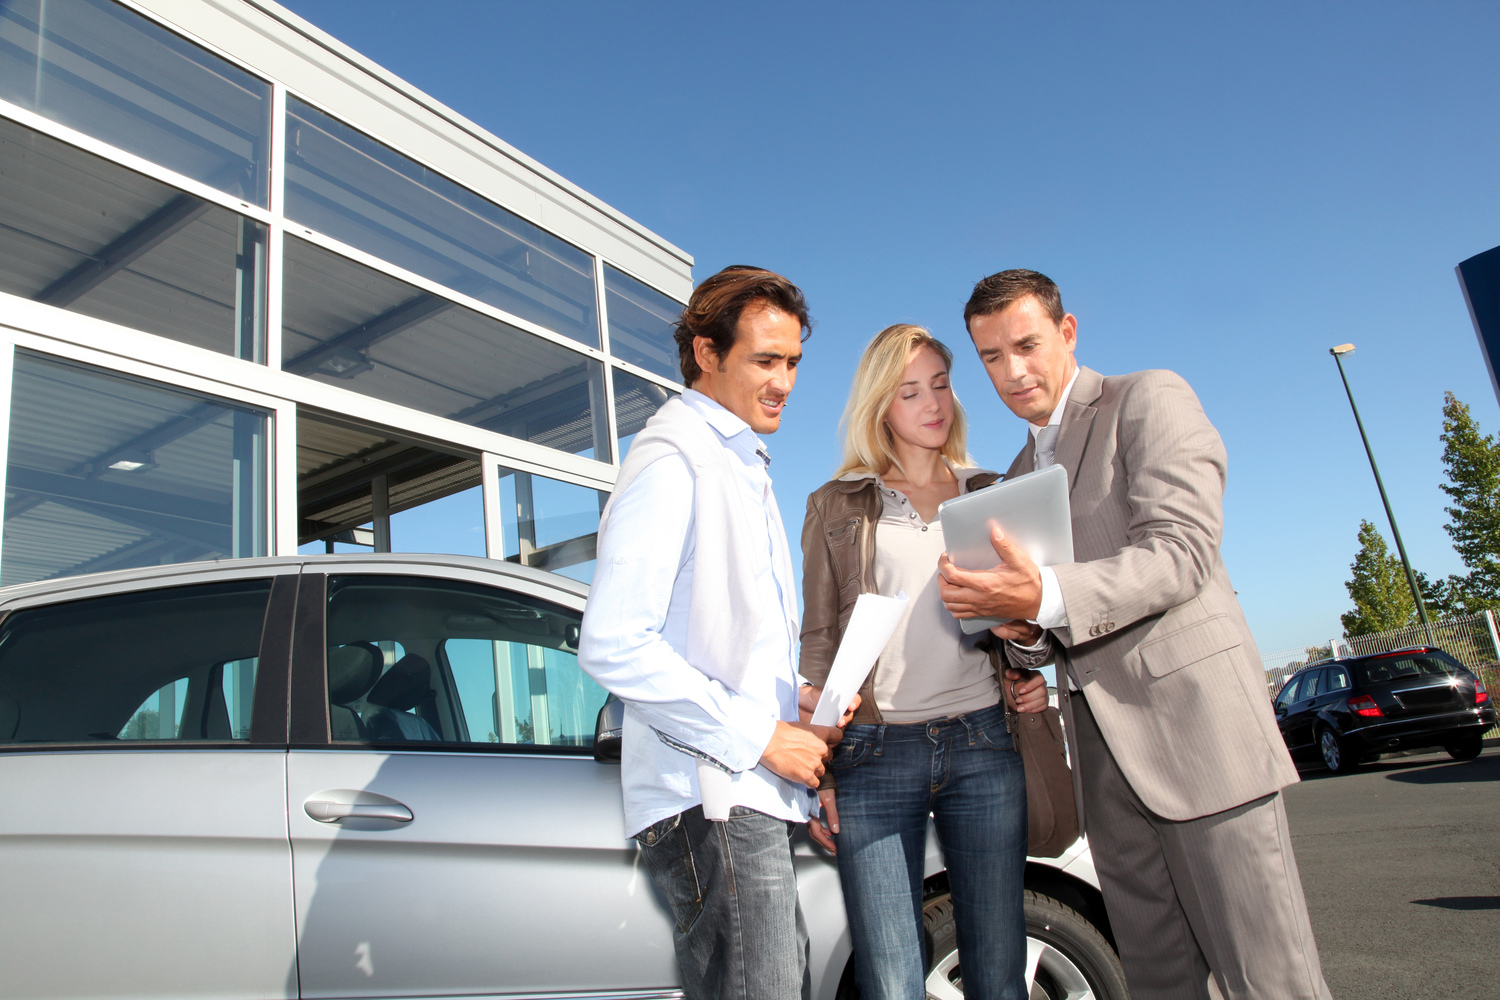 Find a Great Deal with Online Used Car Sellers